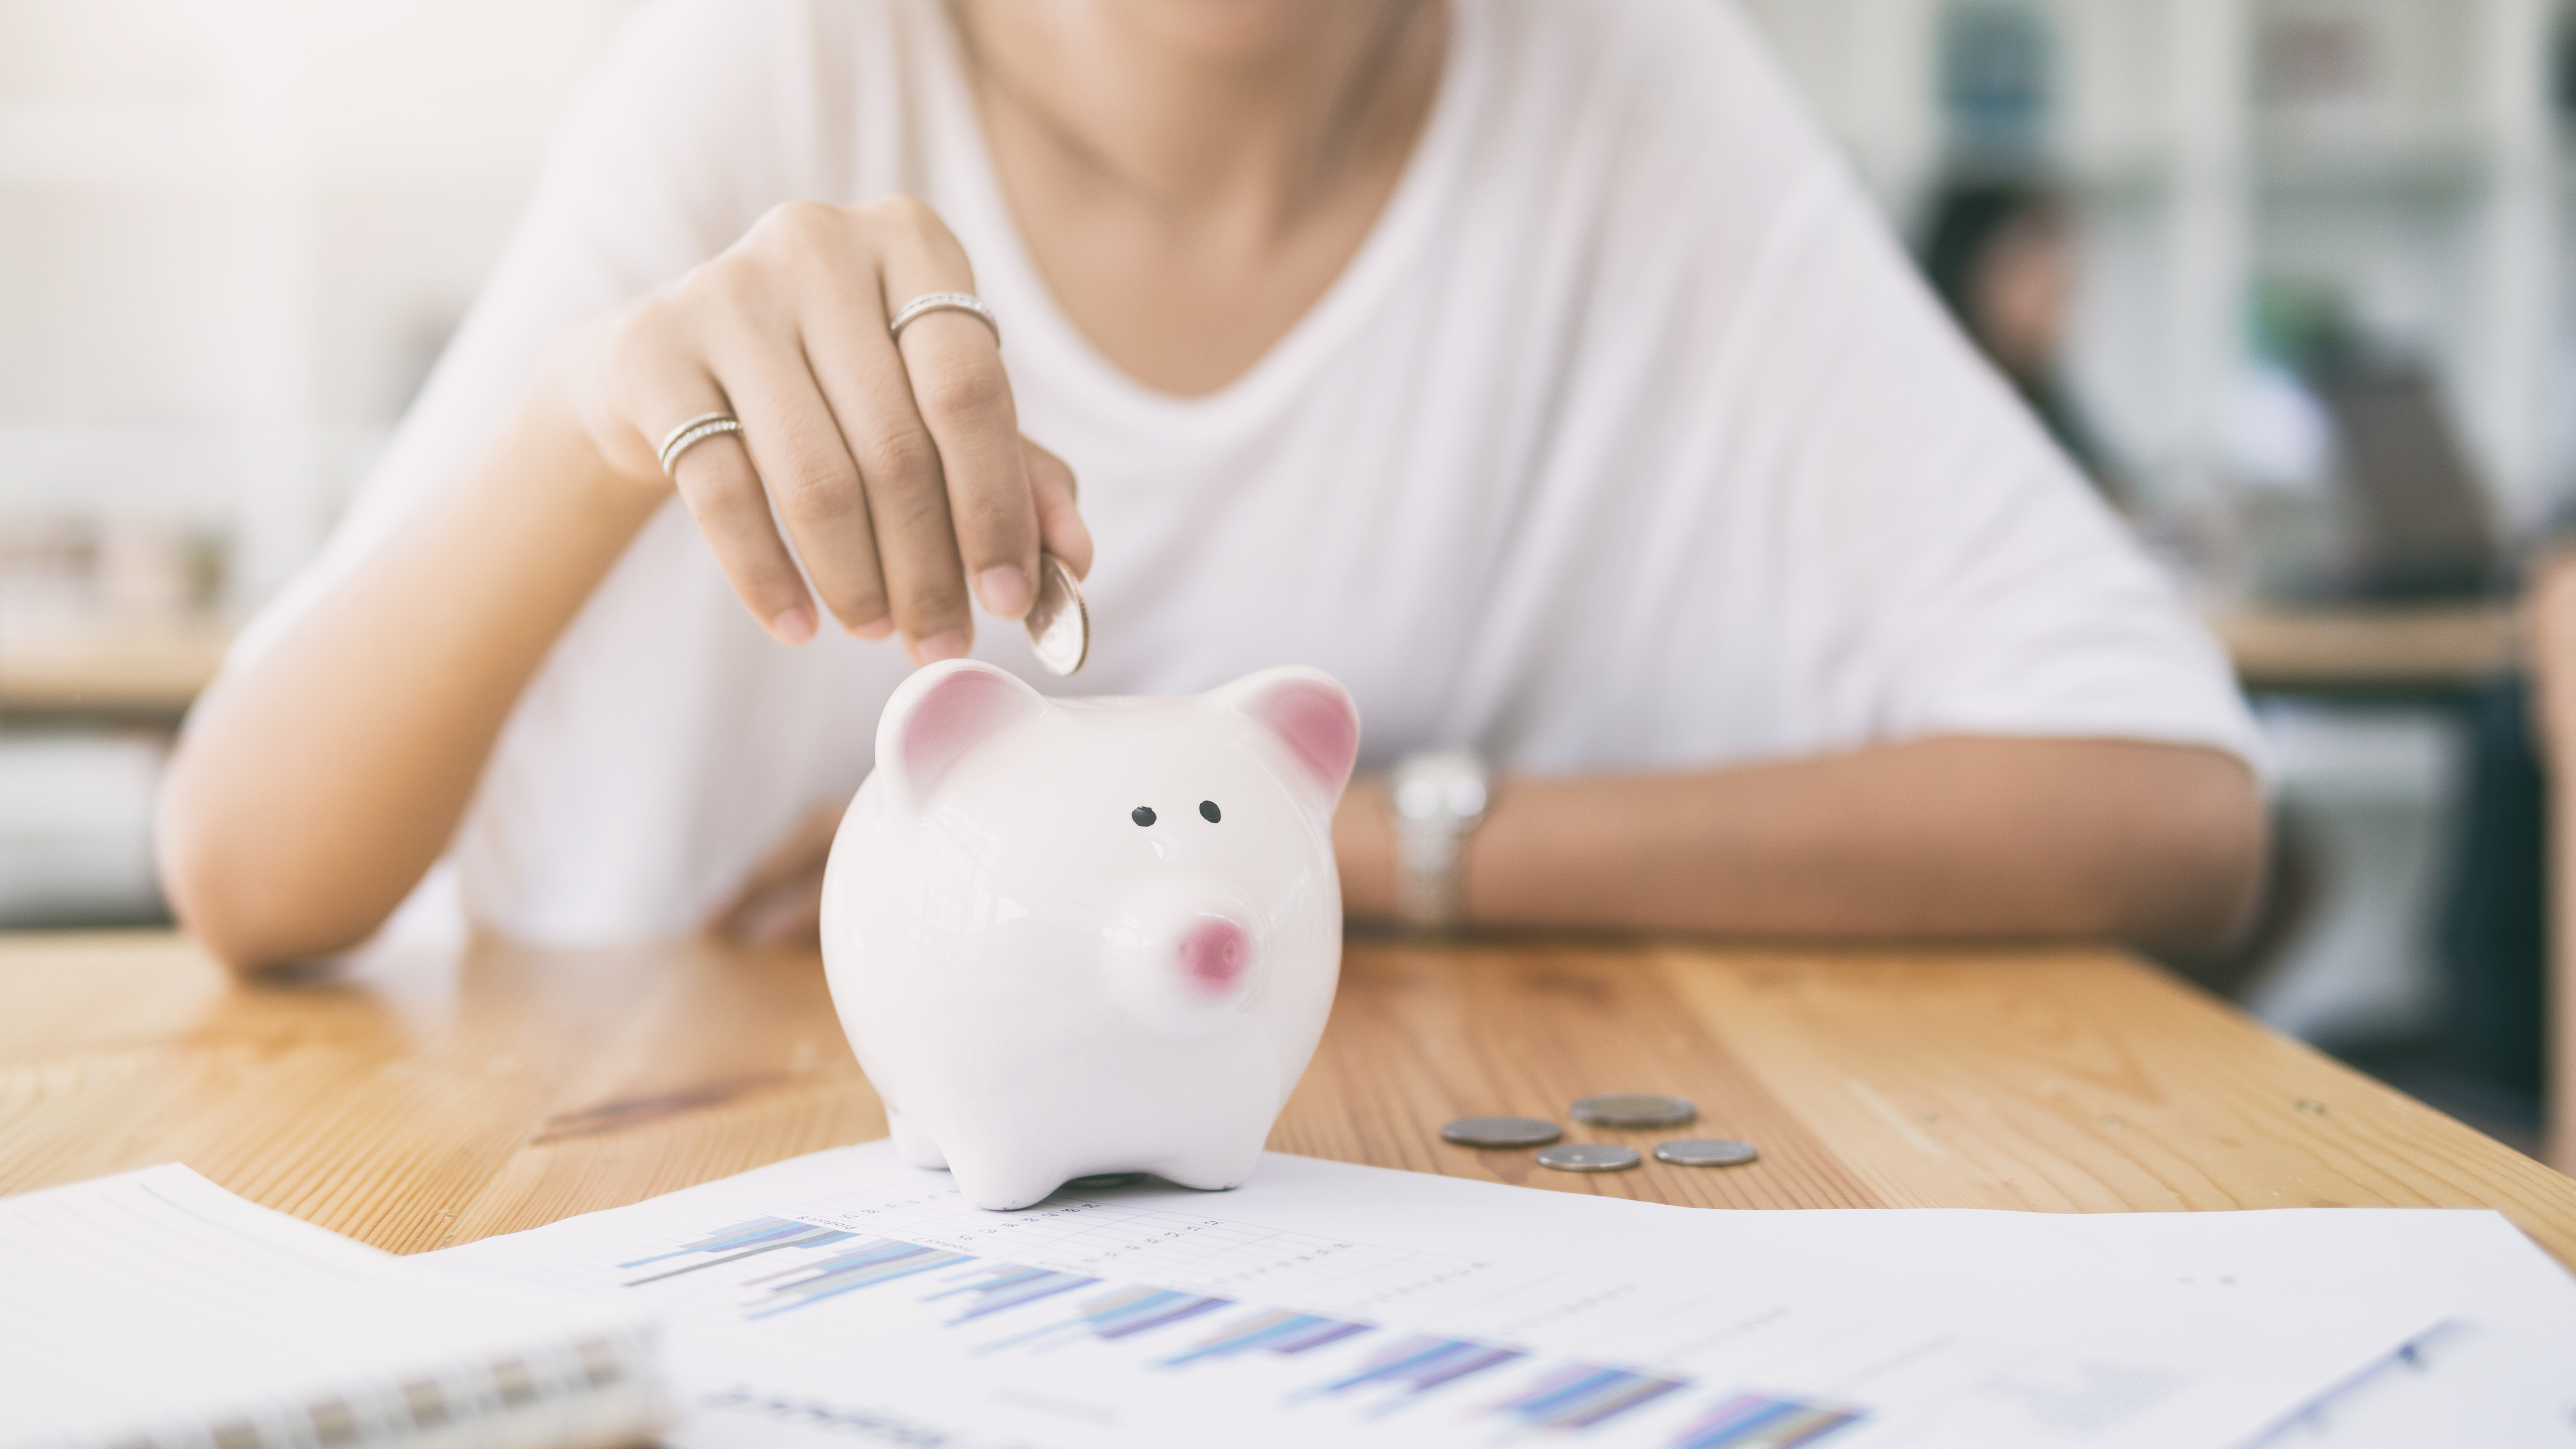 Choosing the right bank account is important for your savings goals